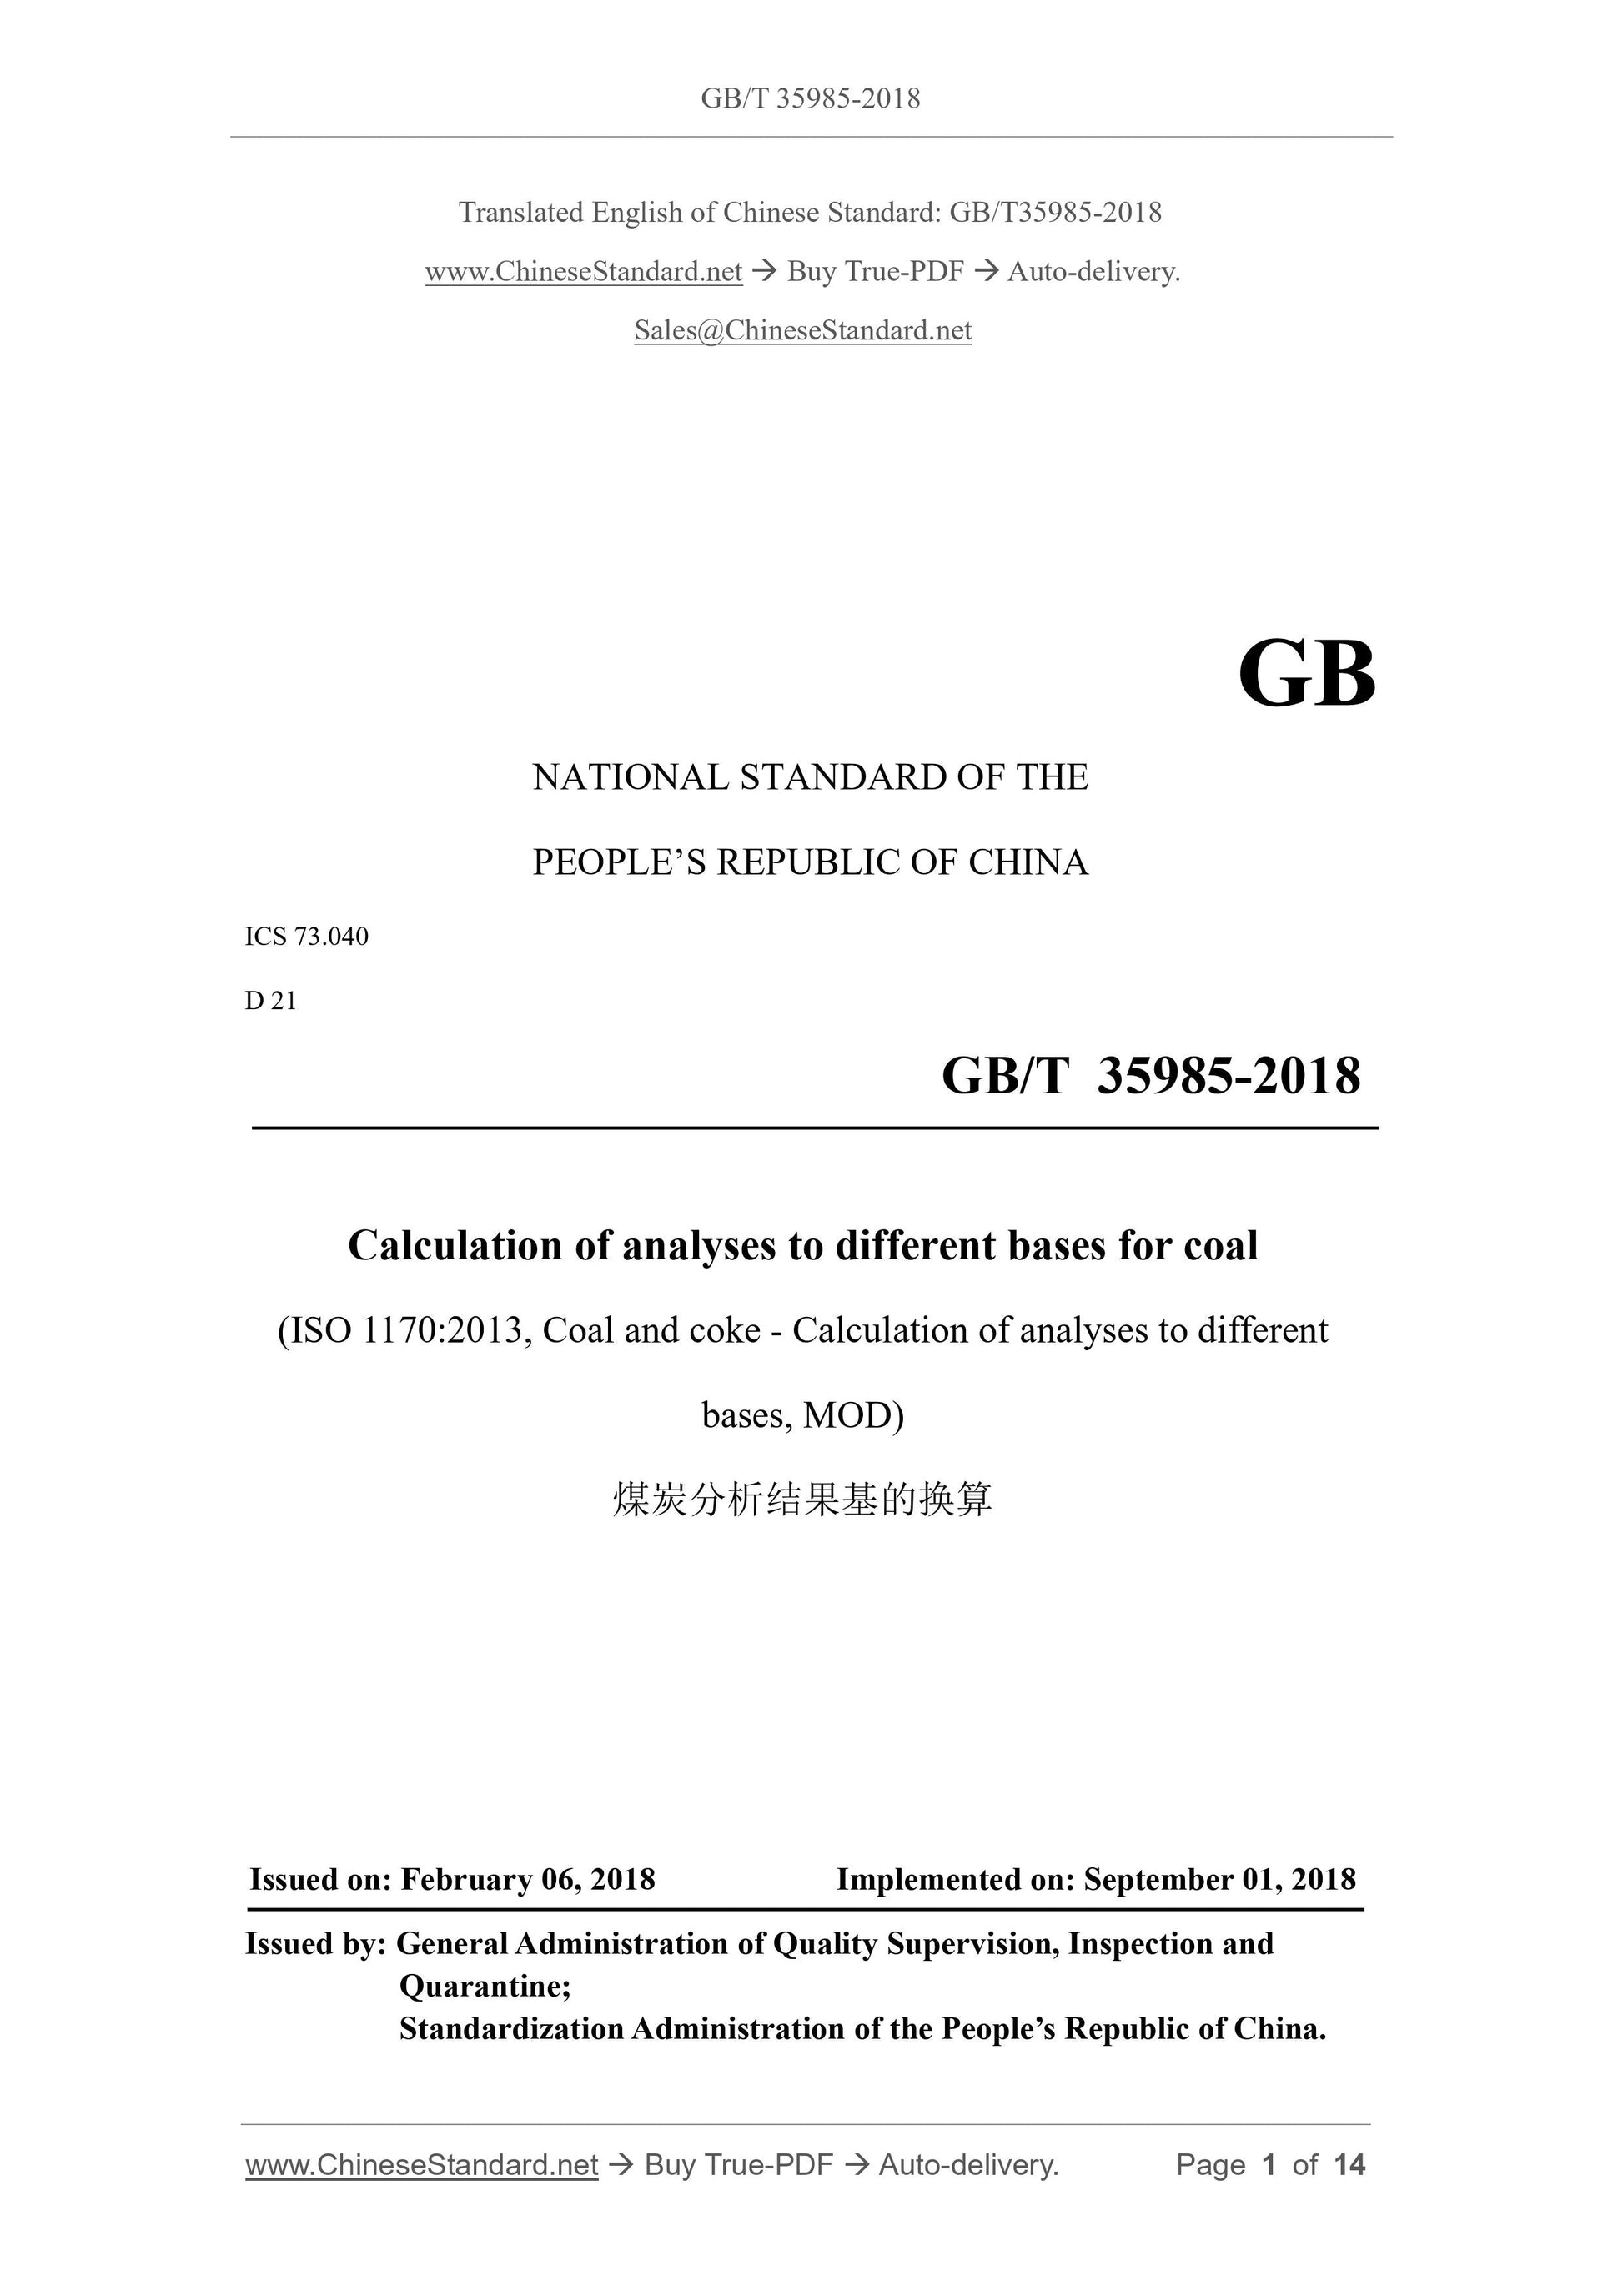 GB/T 35985-2018 Page 1